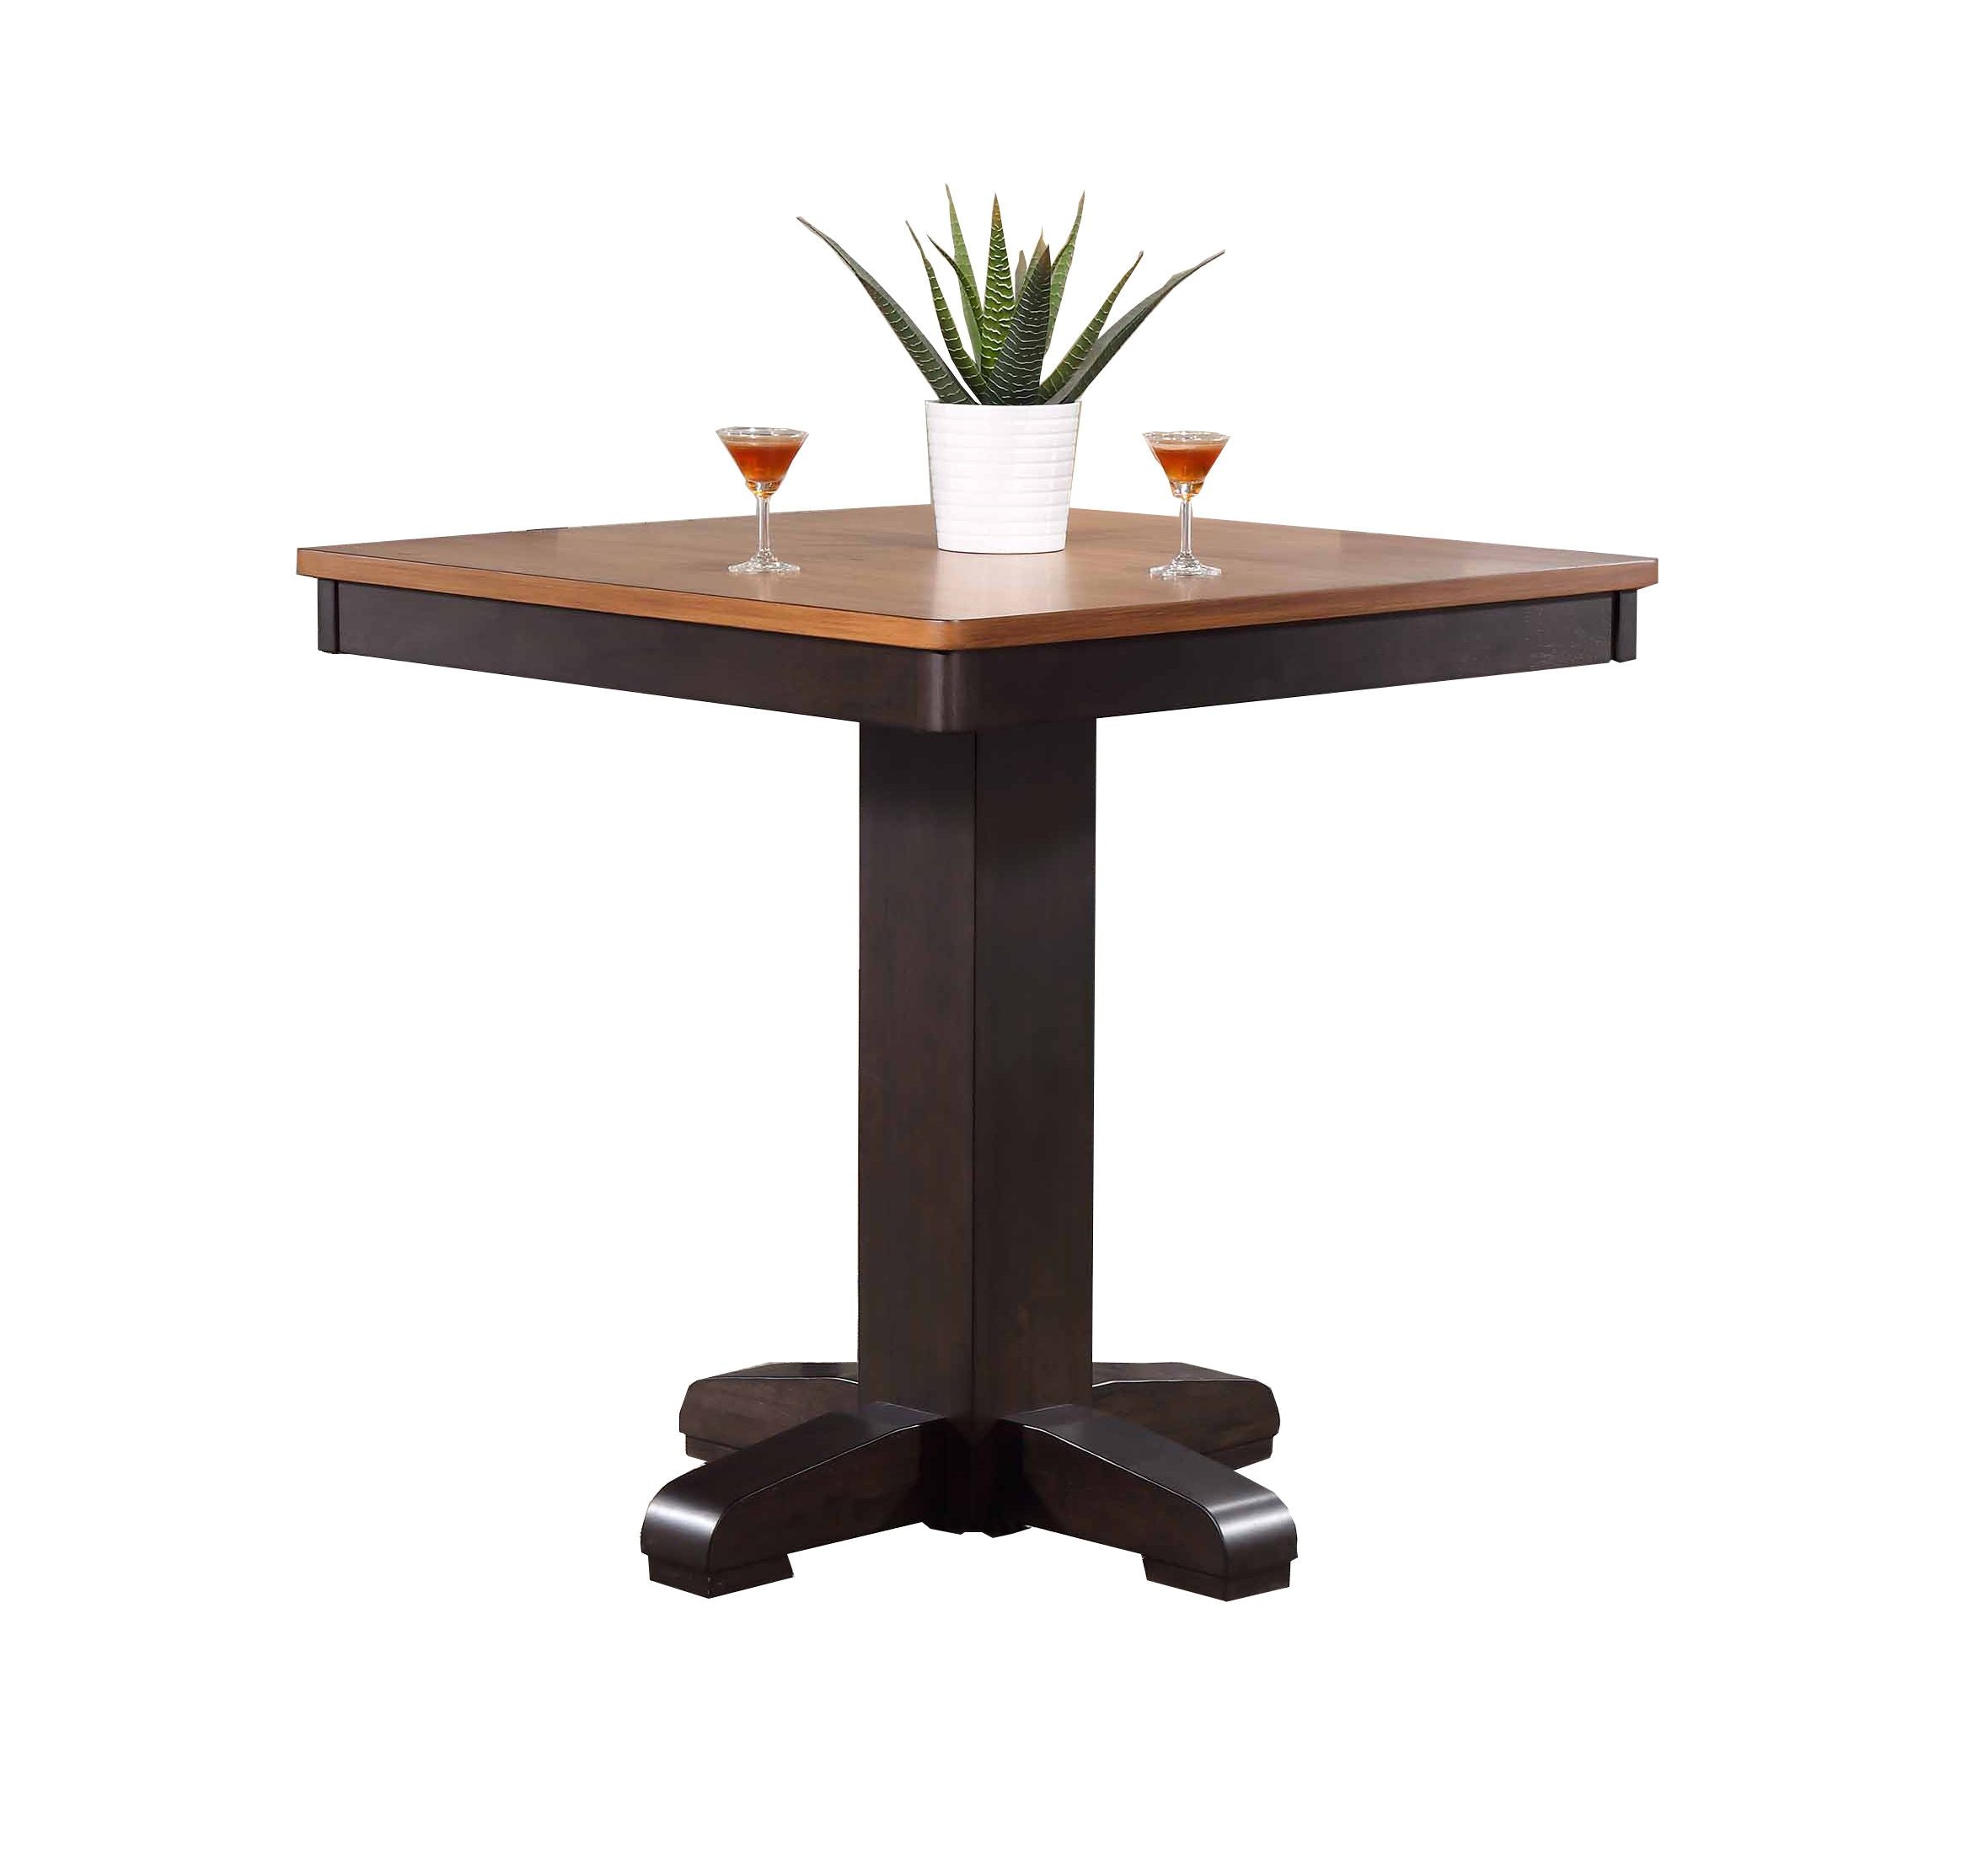 ECI Furniture Choices Choices Pub Dining Table